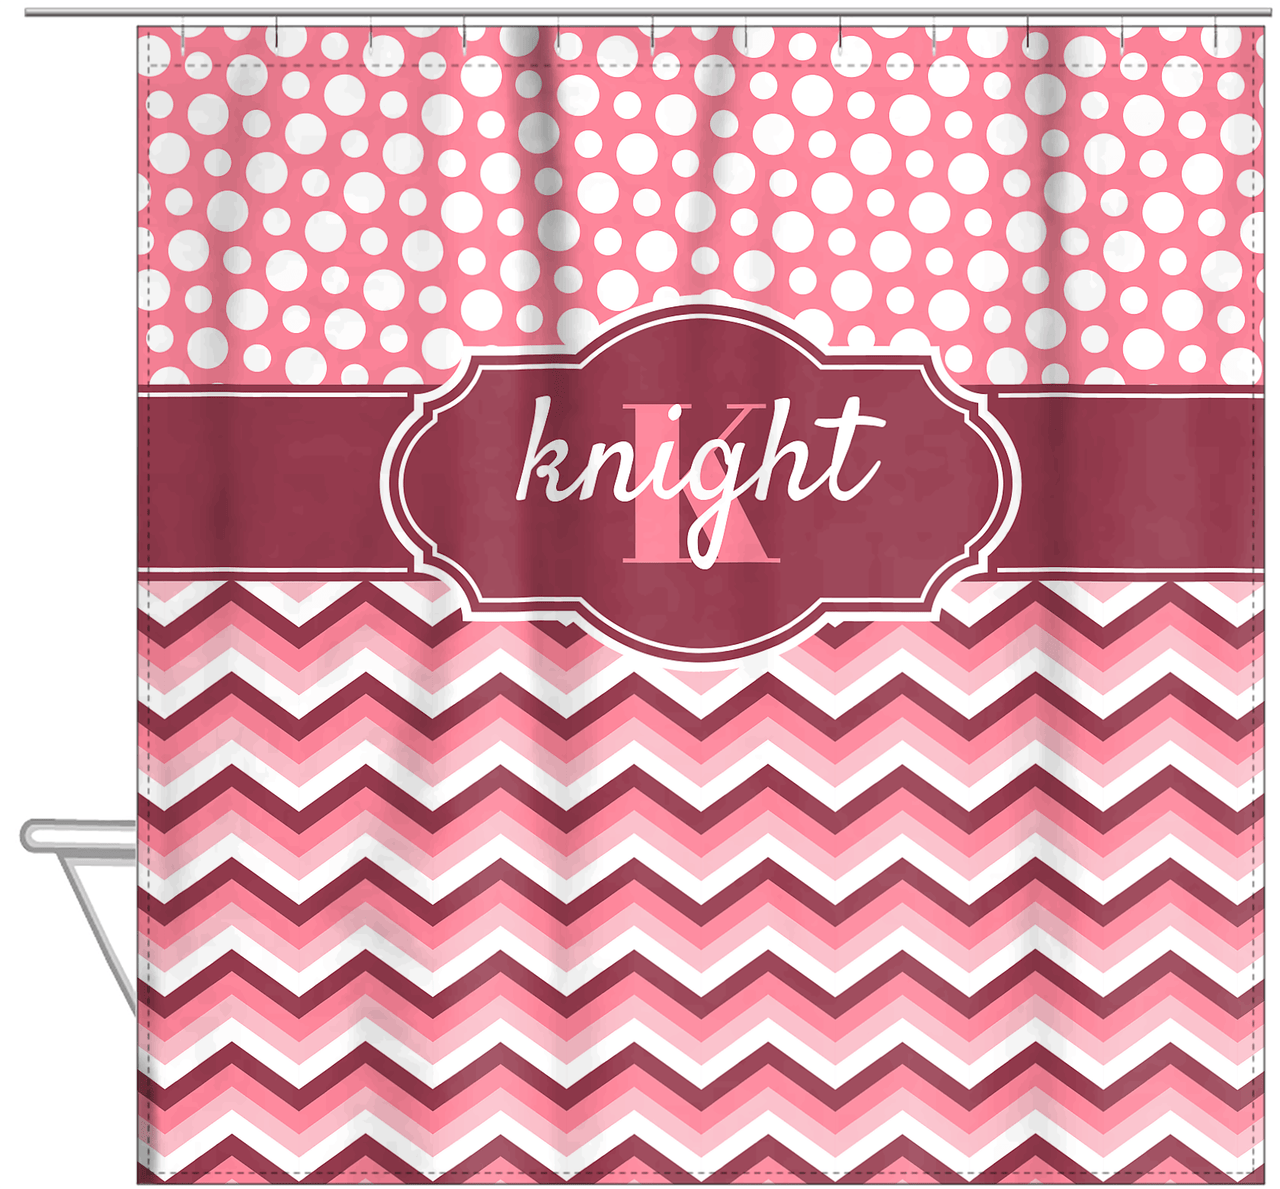 Personalized Polka Dots and Chevron II Shower Curtain - Pink and White - Fancy Nameplate - Hanging View